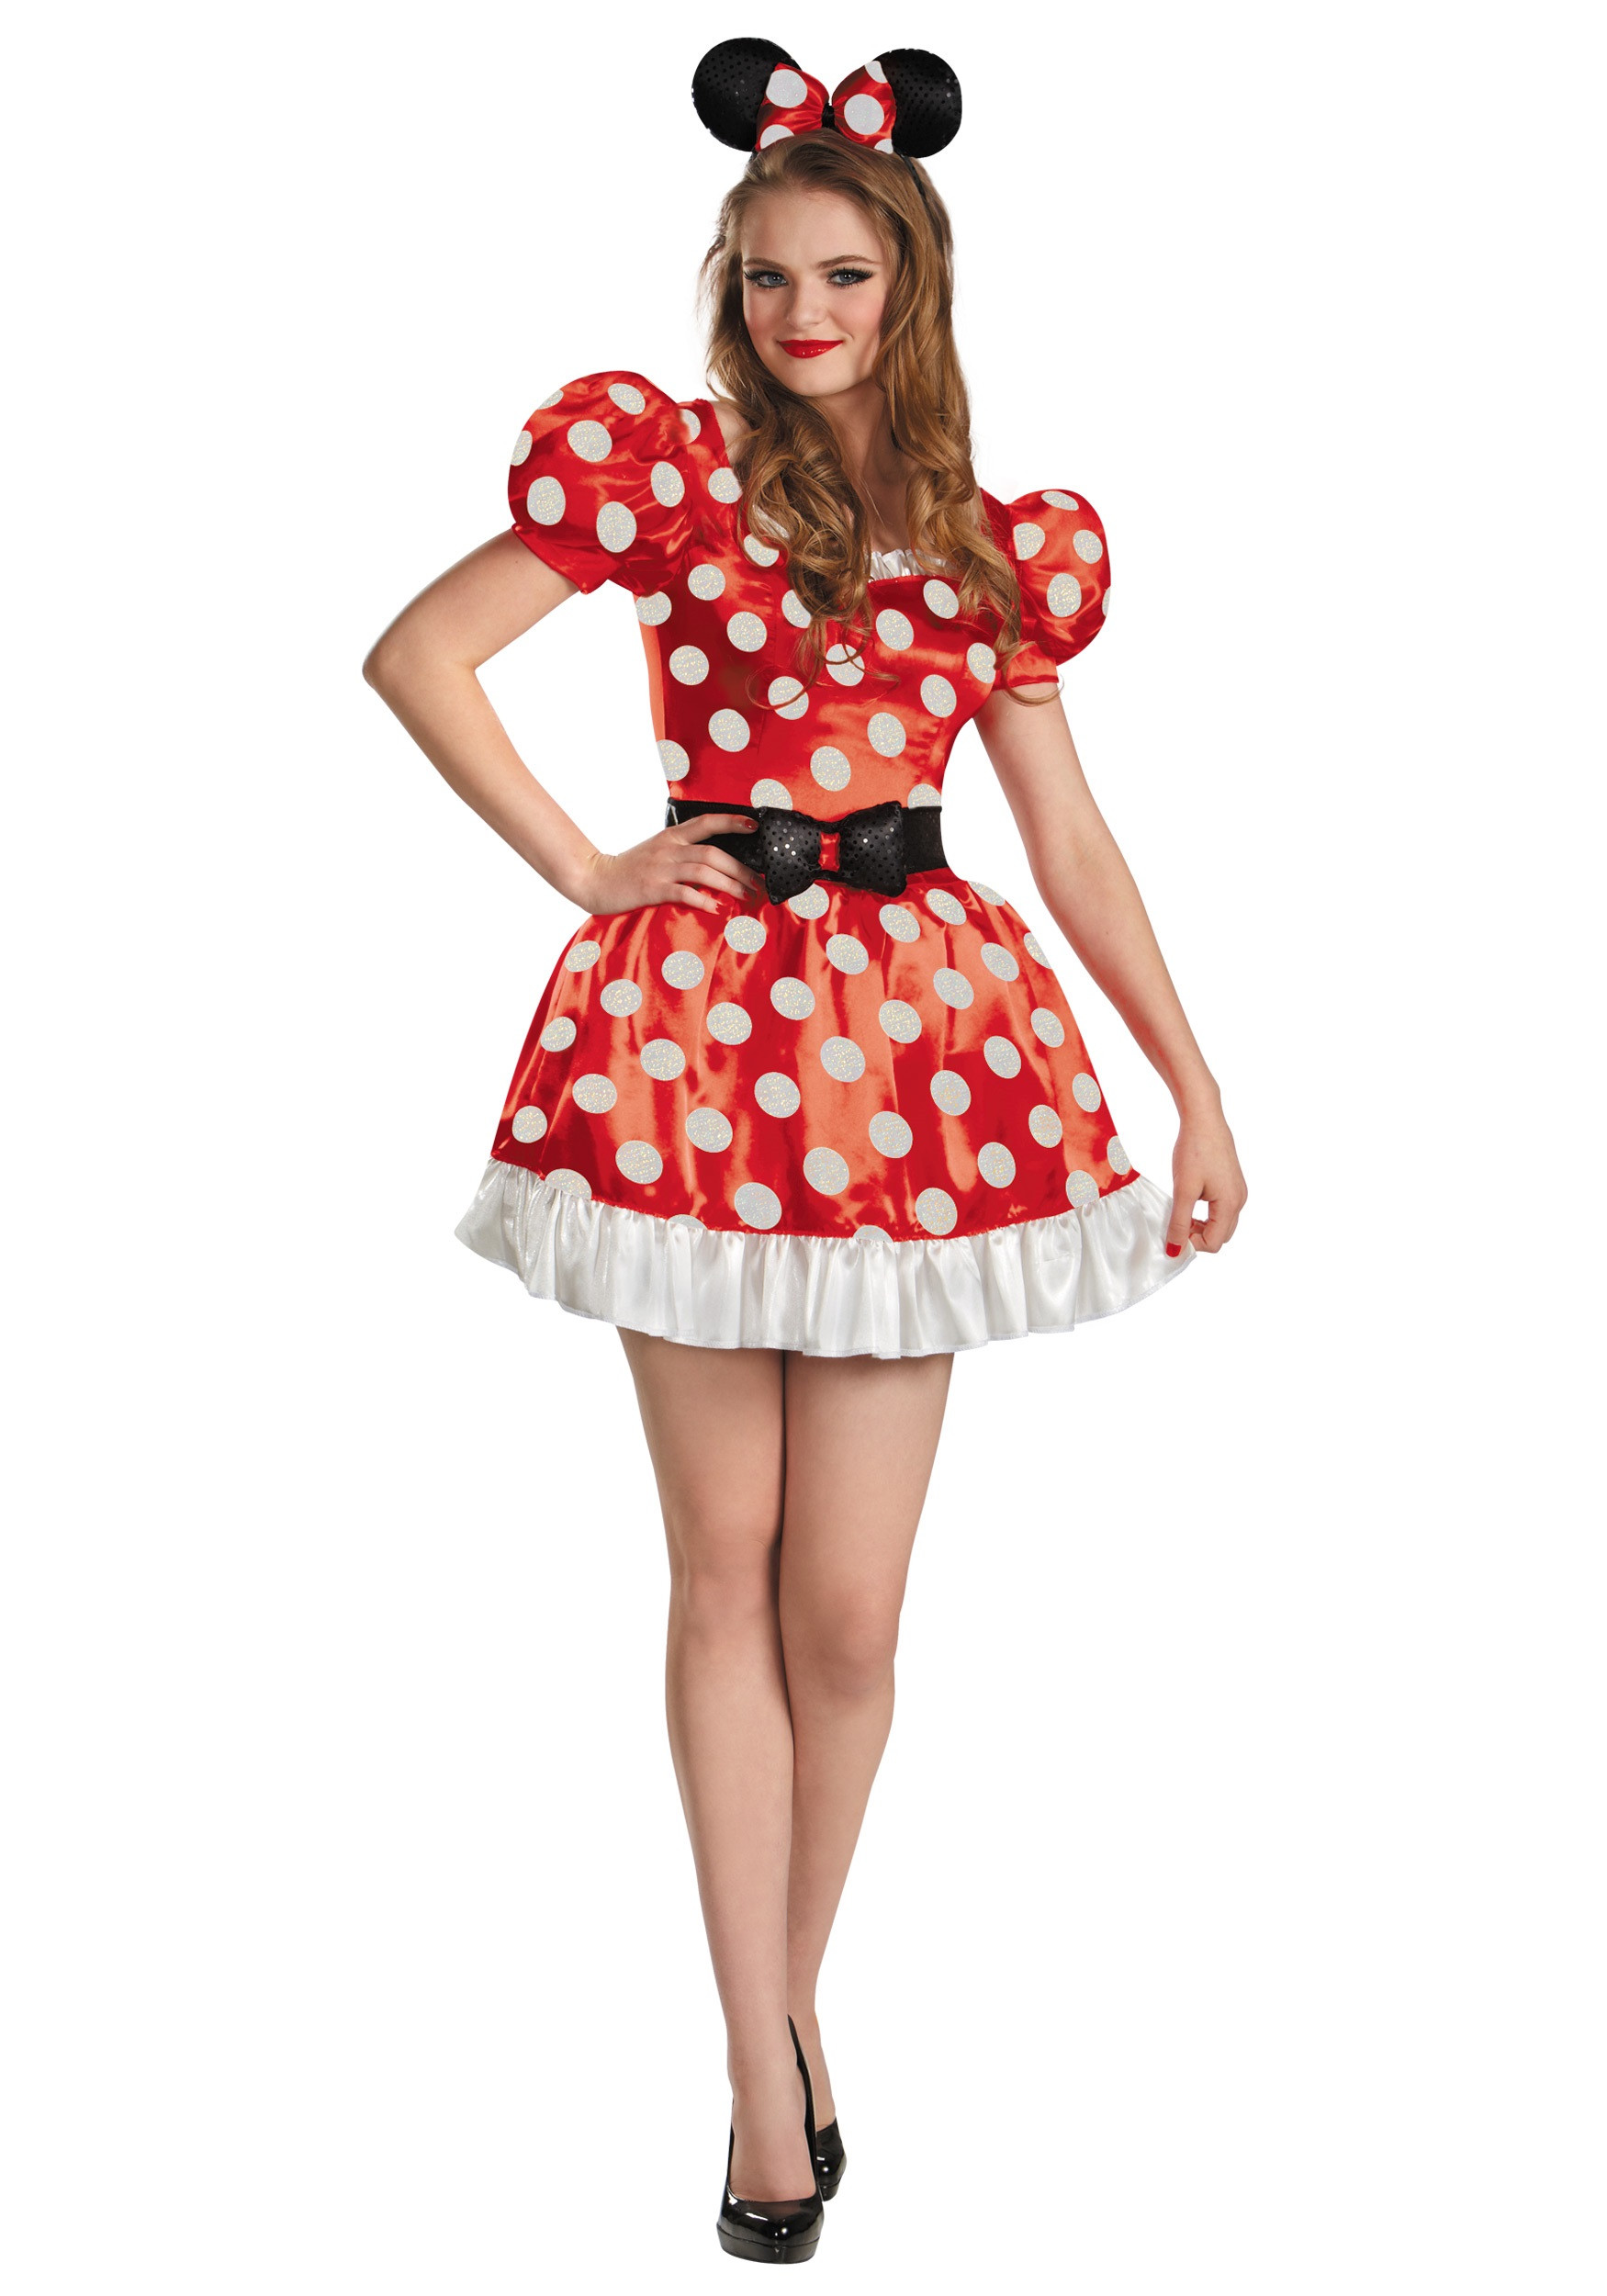 DIY Minnie Mouse Costume For Adults
 Red Minnie Classic Adult Costume